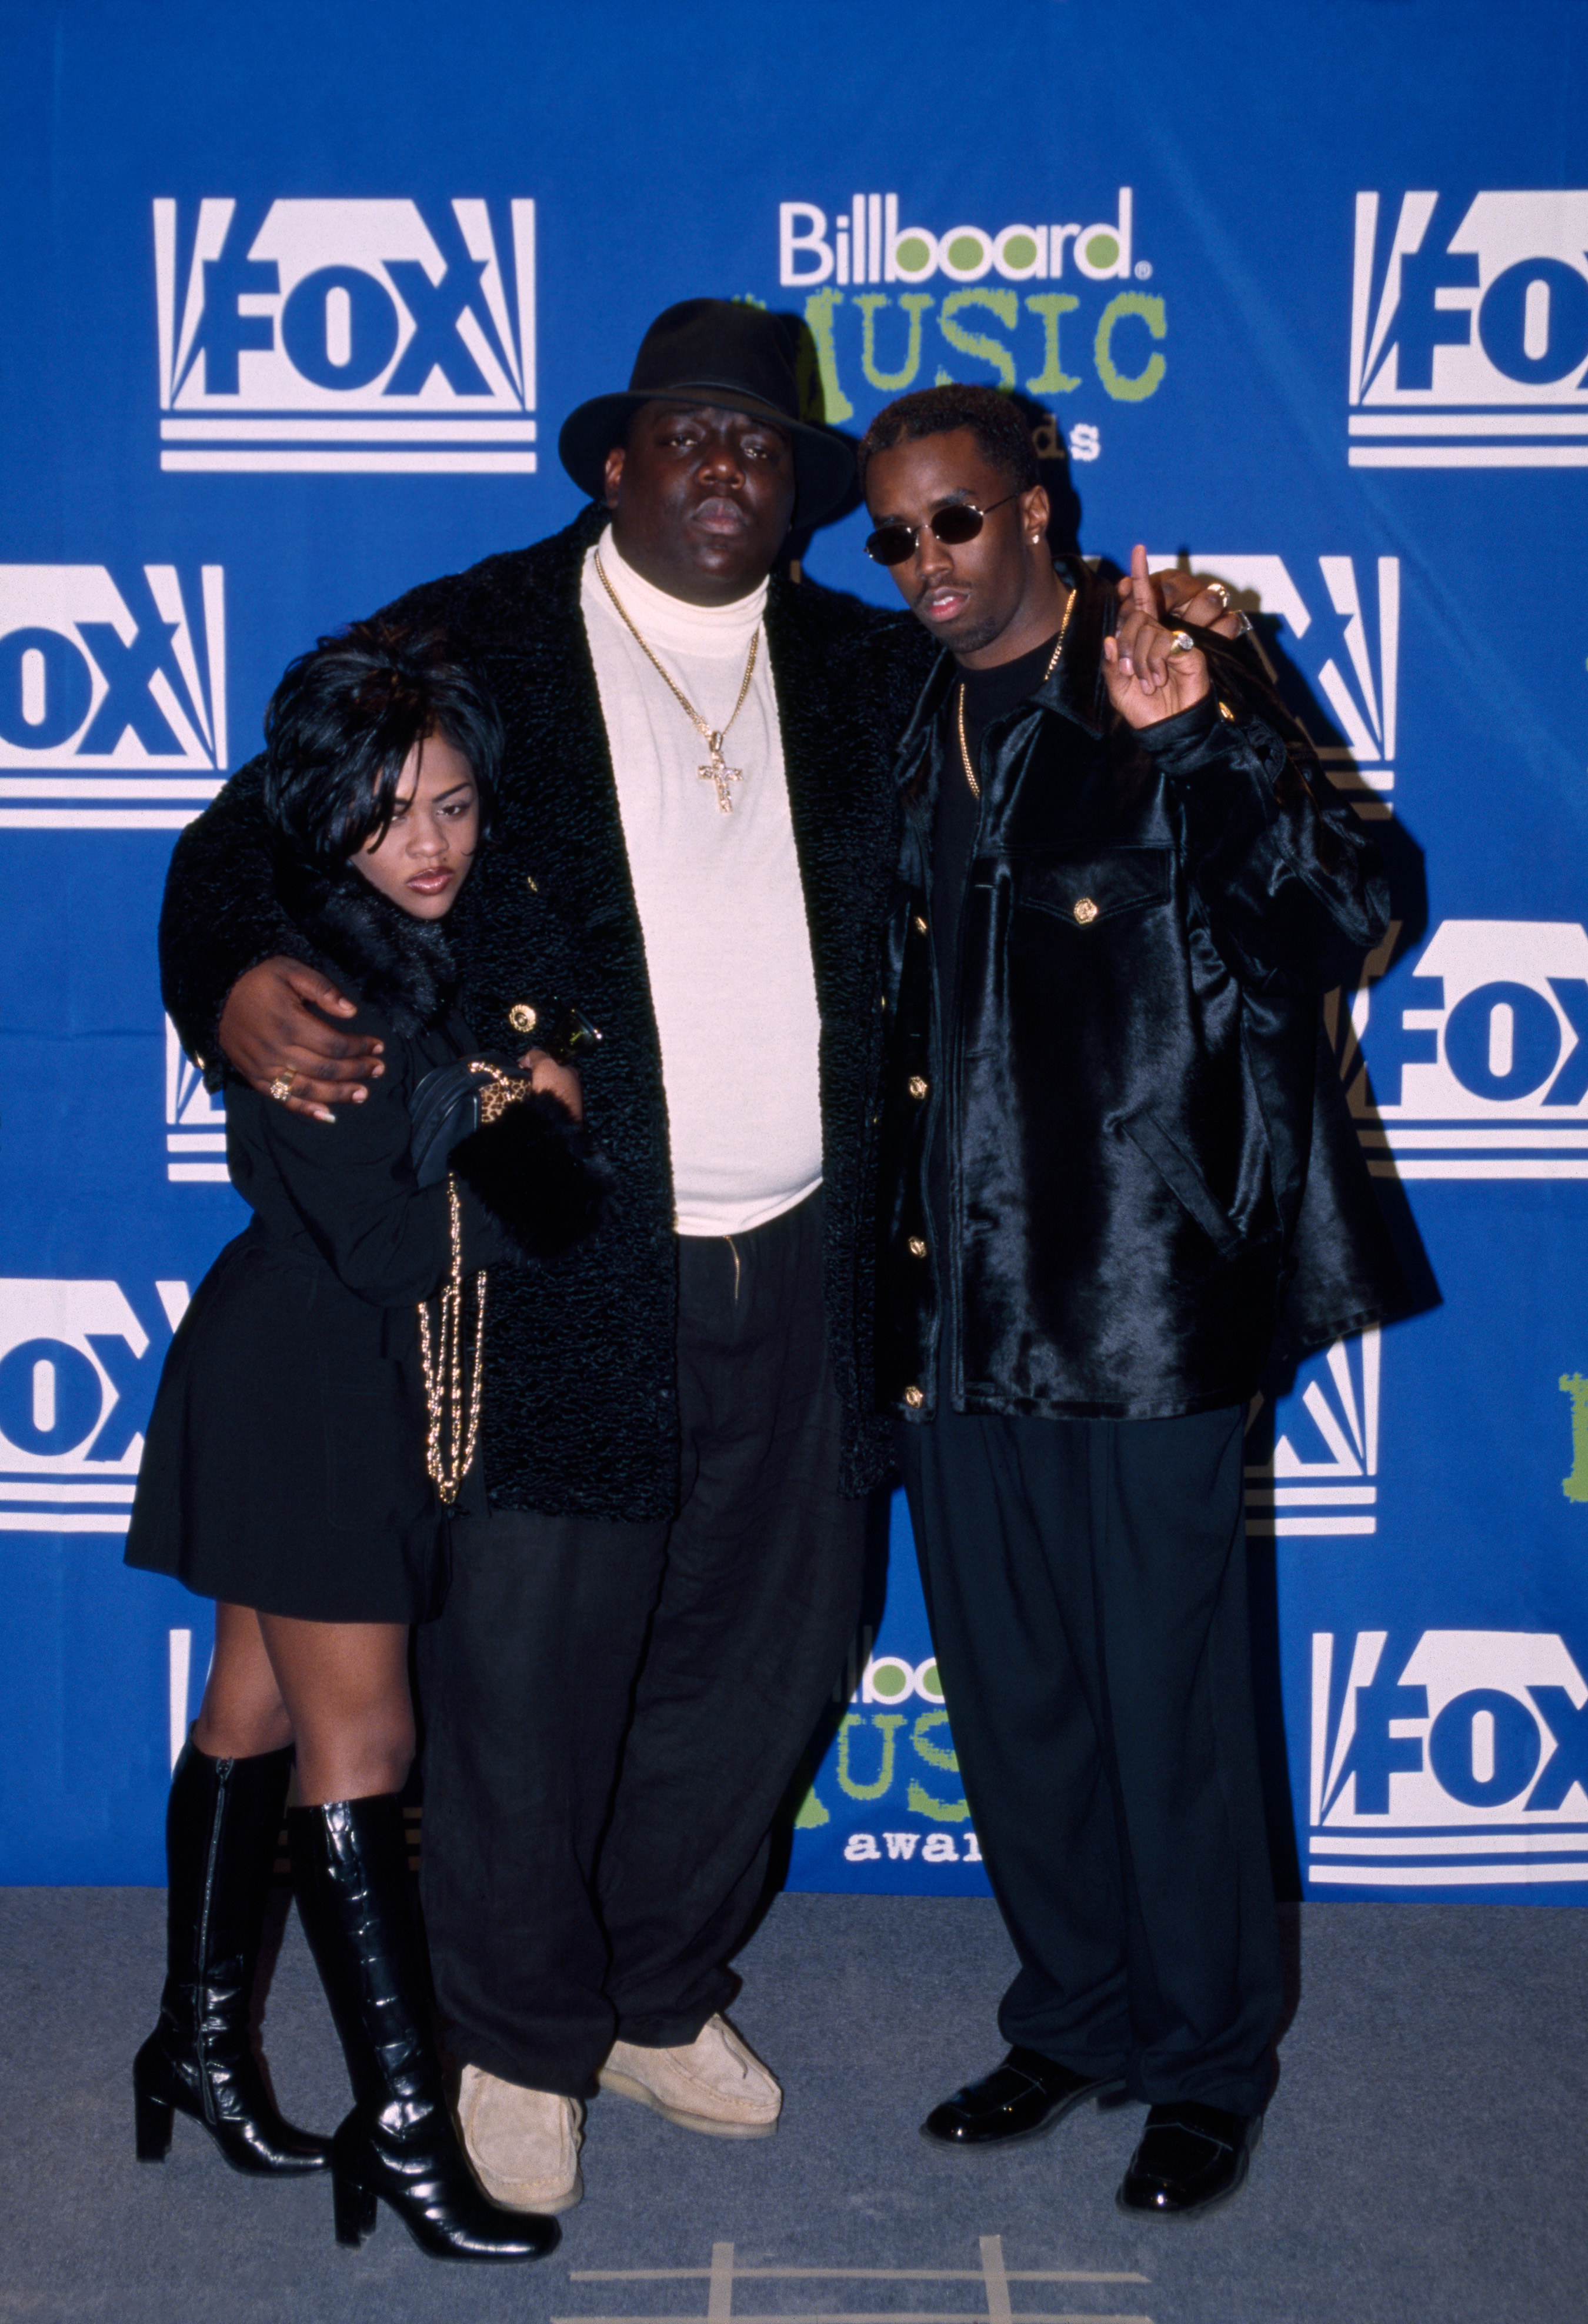 Lil&#x27; Kim, Biggie, and Puff Daddy pose at an event